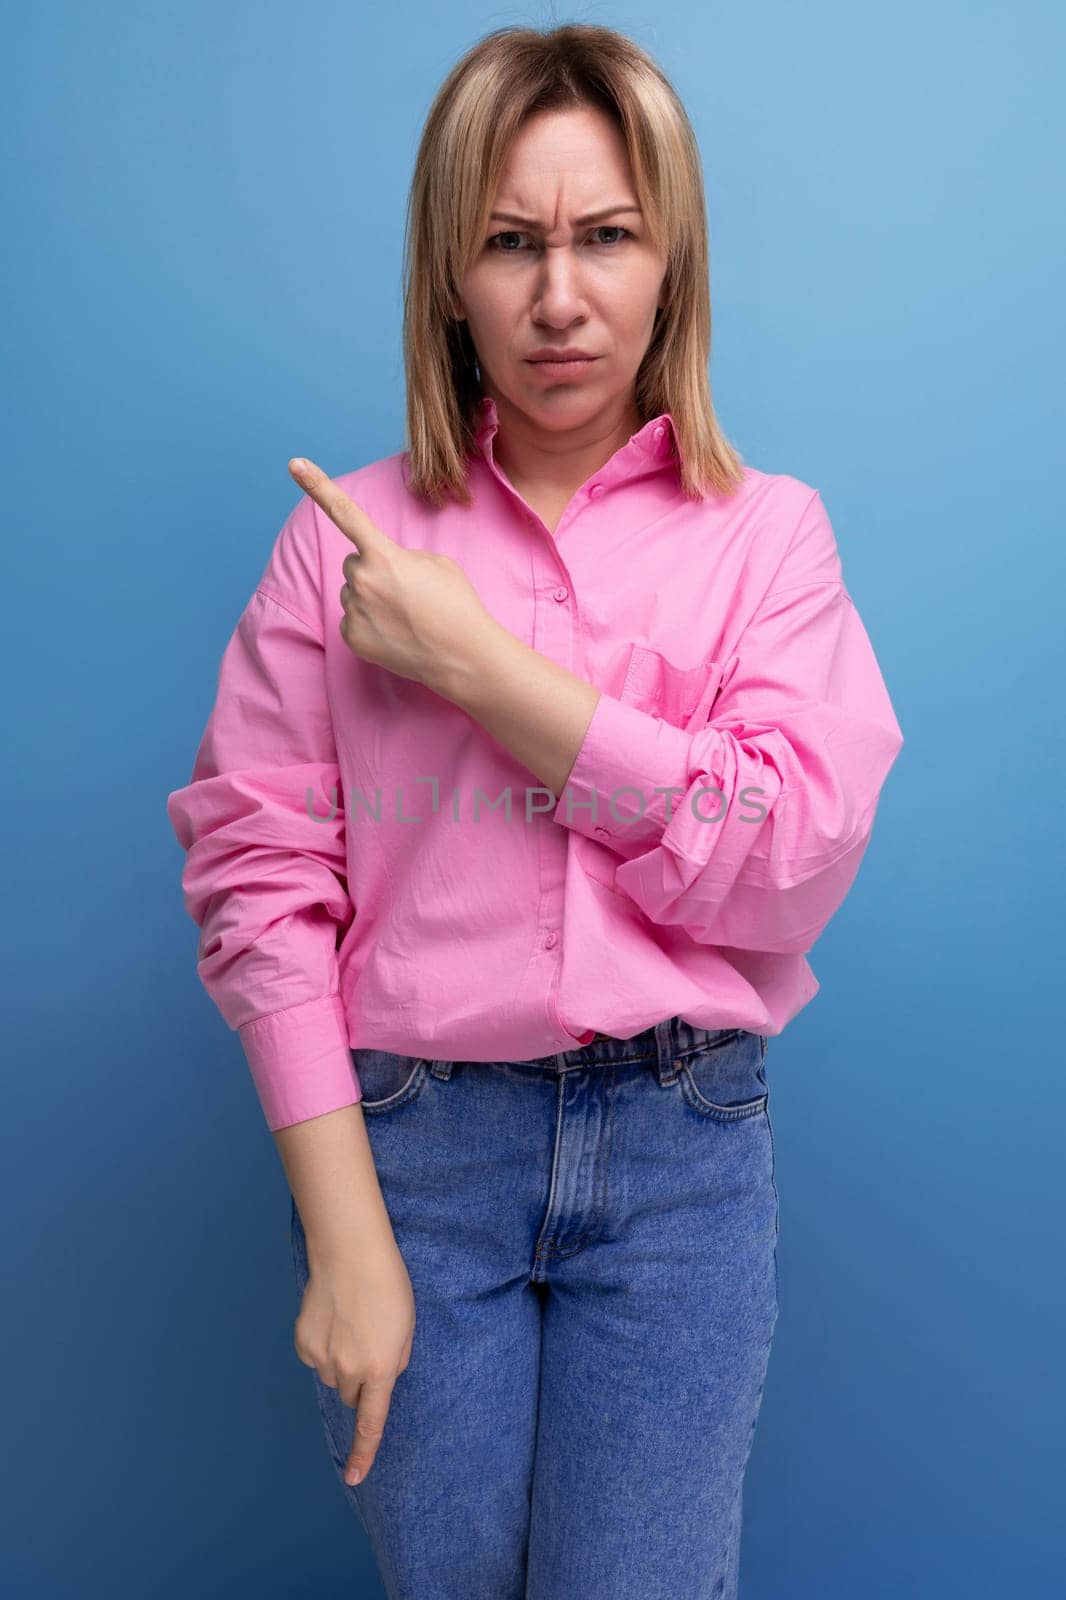 young successful blond careerist leader woman in a pink blouse shows her hands towards the empty space for advertising.